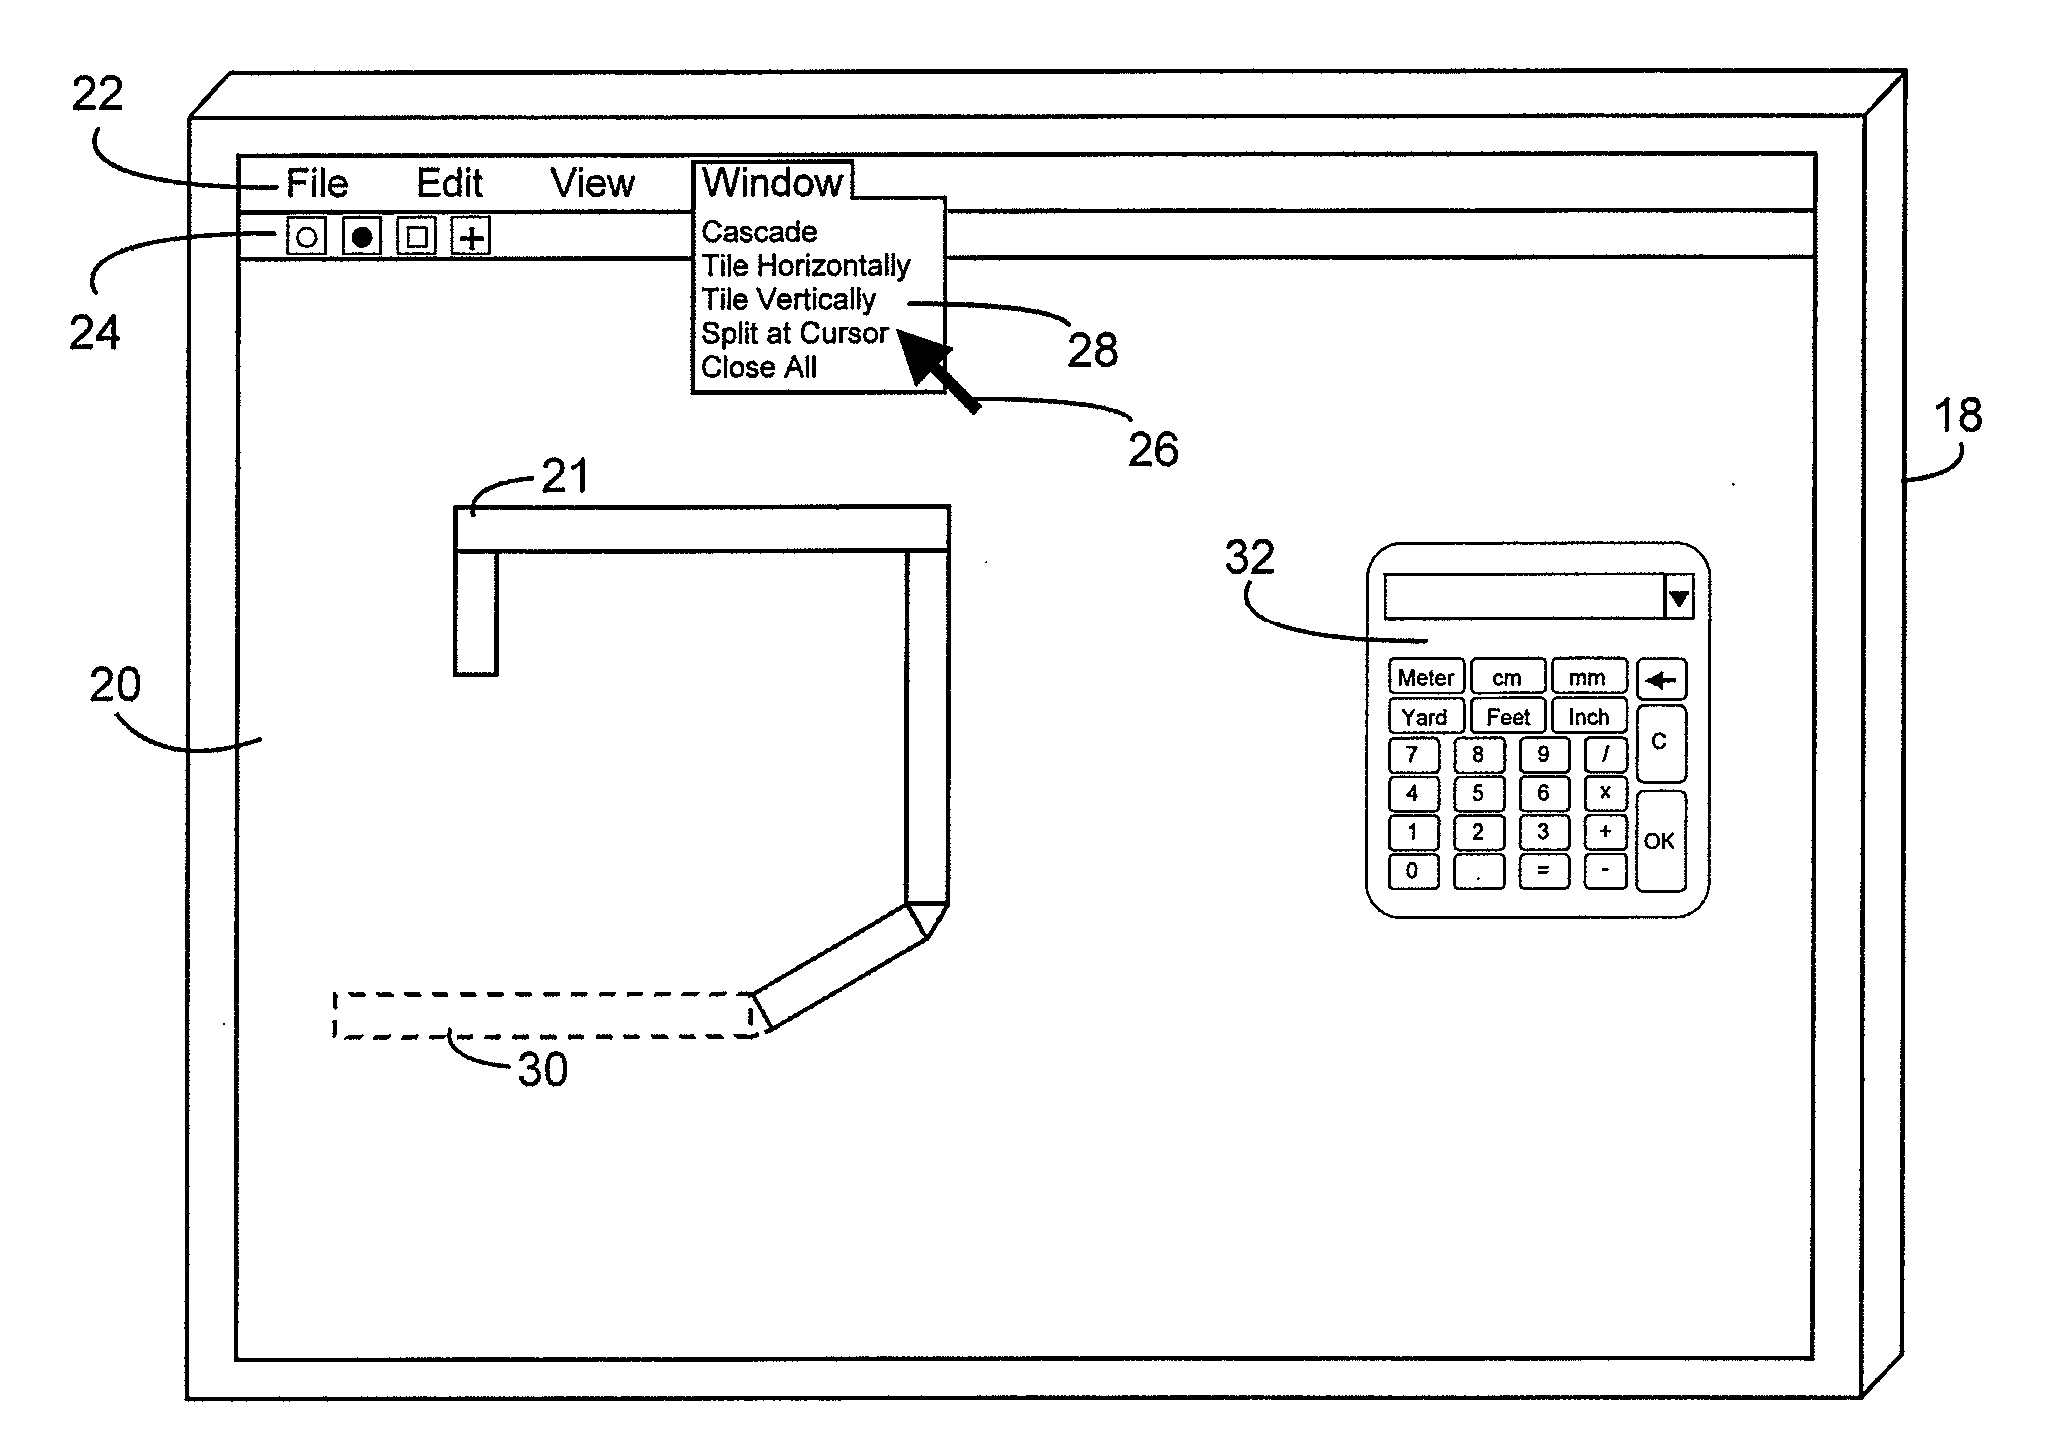 Computer aided design interface